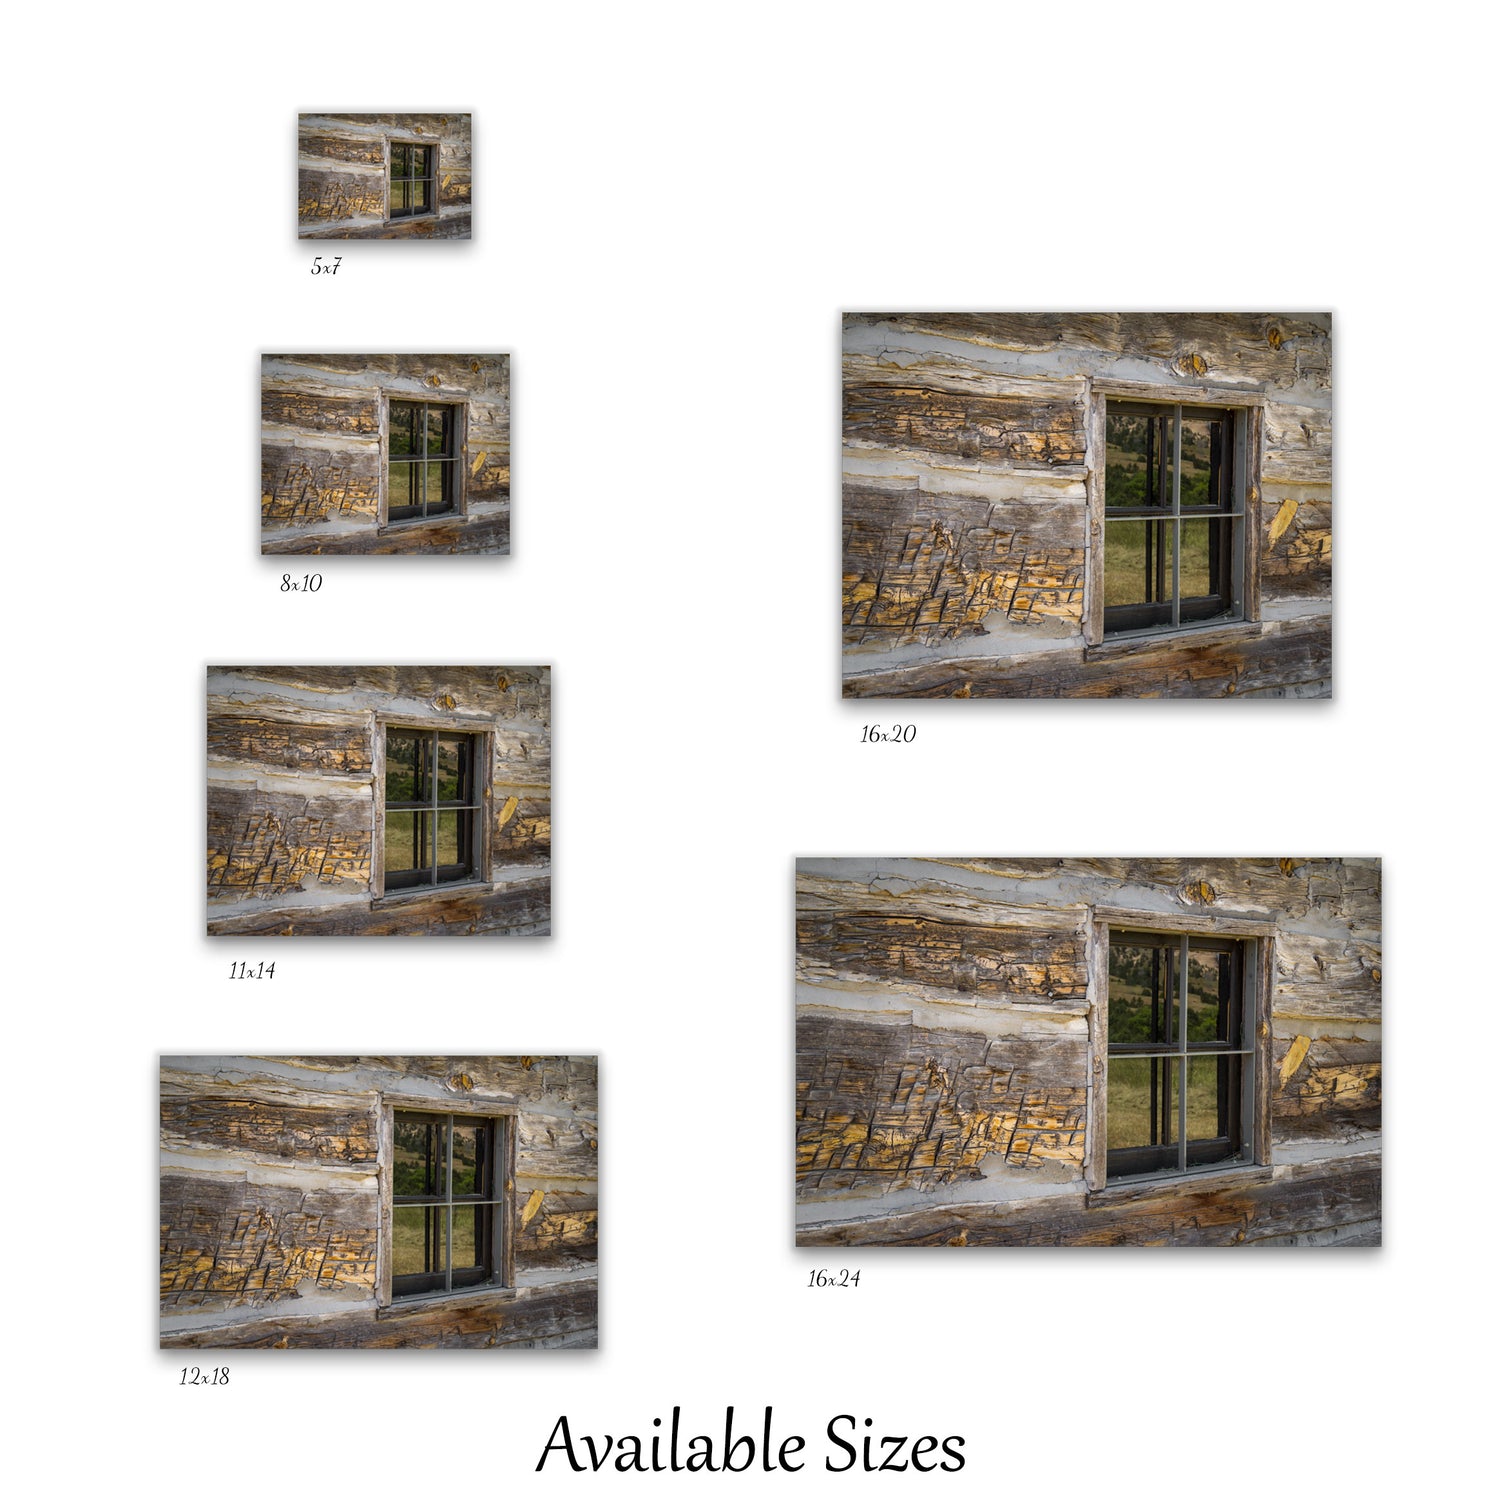 Visual representation of the old cabin window wall art print sizes available: 5x7, 8x10, 11x14, 12x18, 16x20, and 16x24.